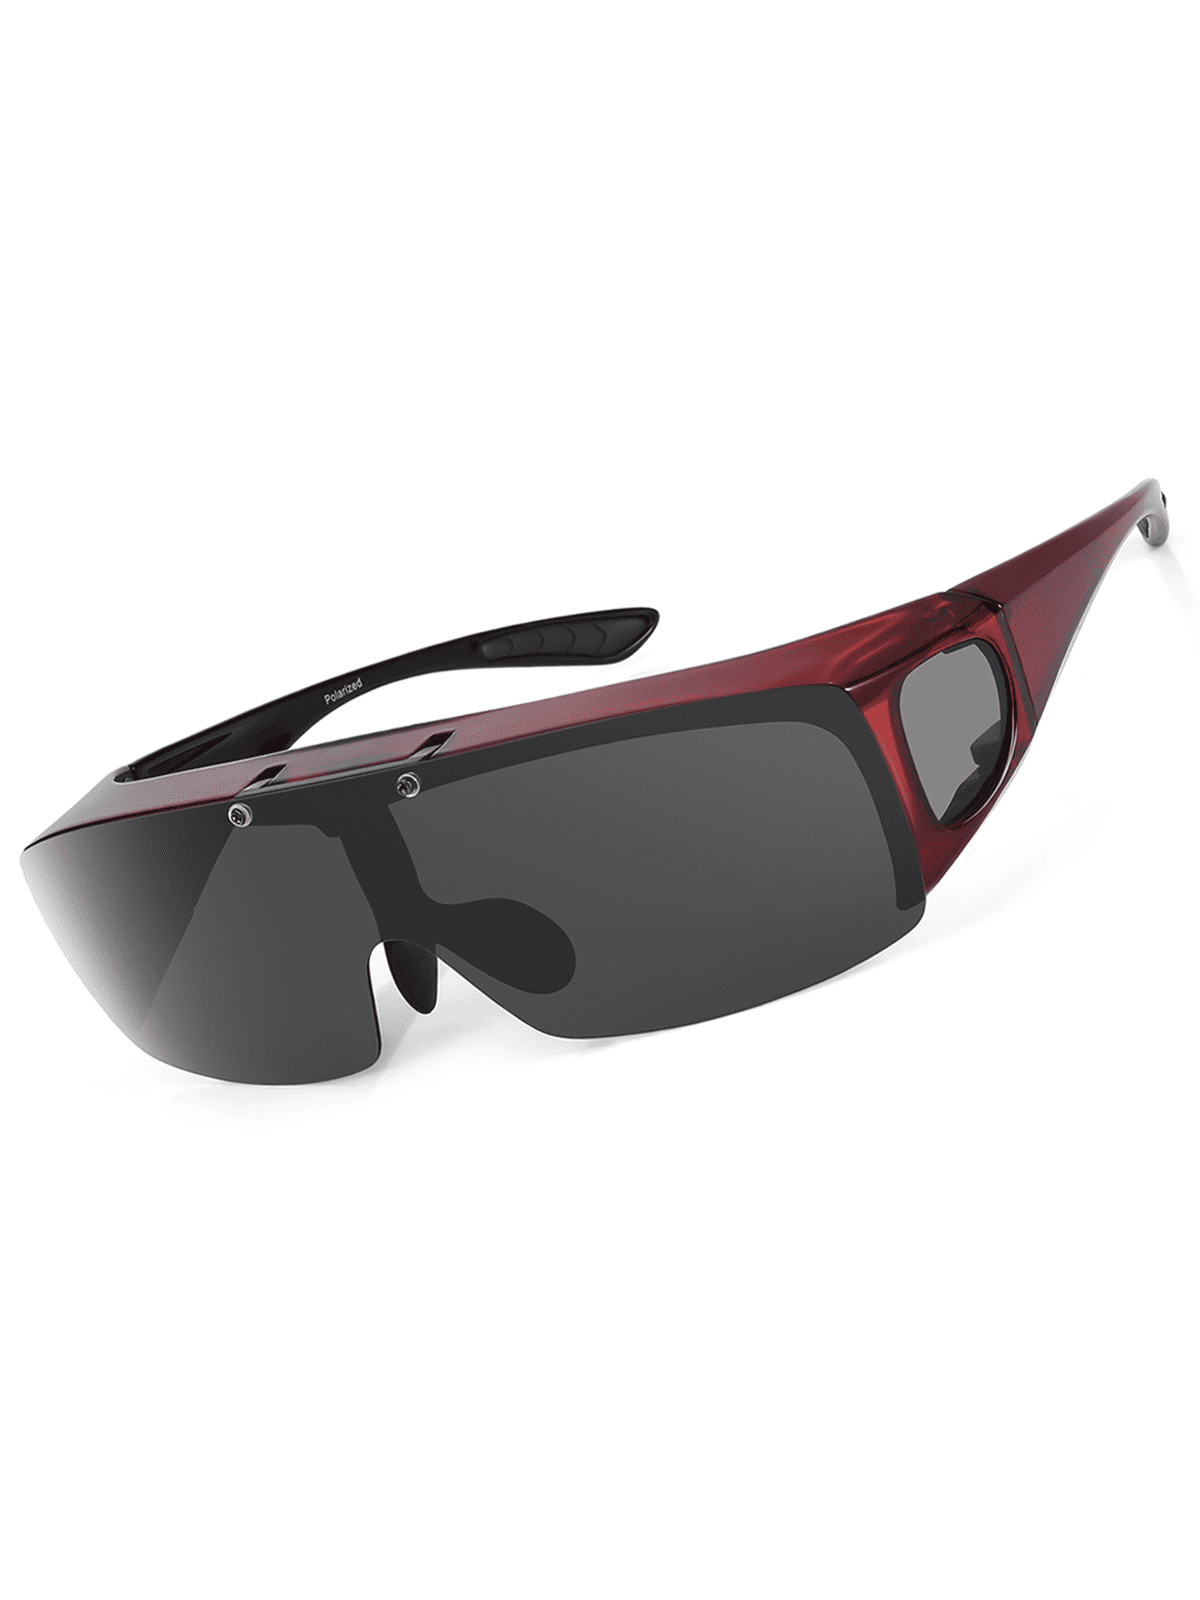 Buy TINHAO Fit Over Sunglasses for Women - Polarized Fitover Sunglasses  with 100% UV Protection for Driving,Fishing,Cycling,Running and Golf with  Amber Leopard Frame at